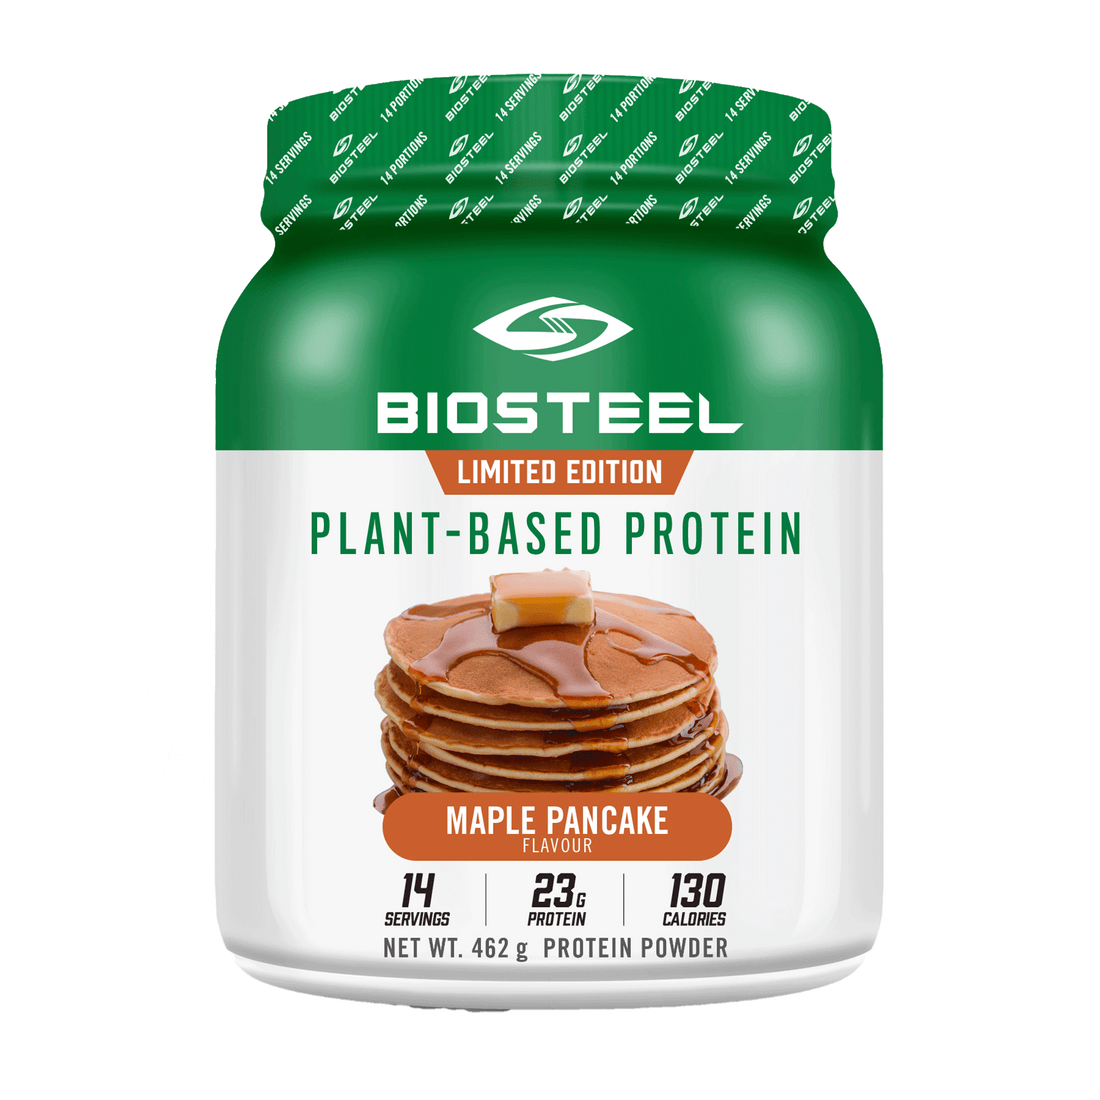 PLANT-BASED PROTEIN / Maple Pancake 14 SERVINGS